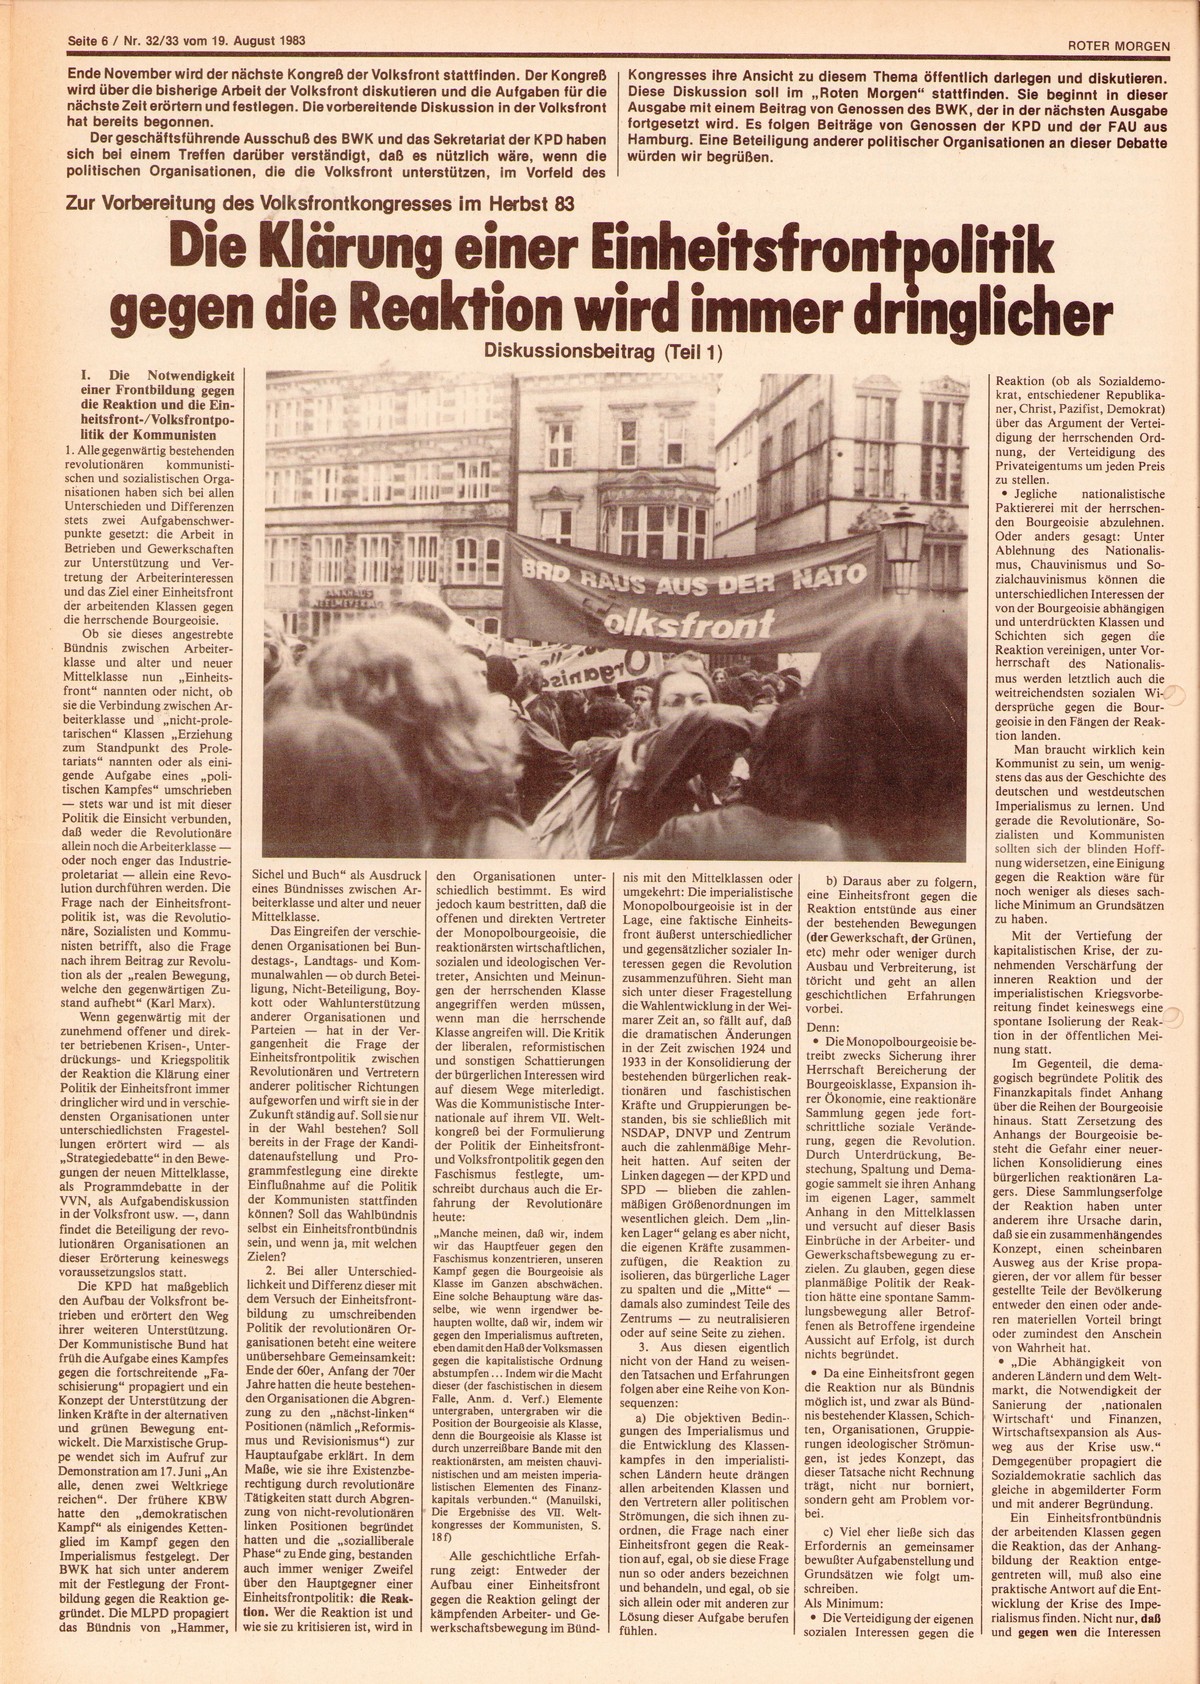 Roter Morgen, 17. Jg., 19. August 1983, Nr. 32/33, Seite 6